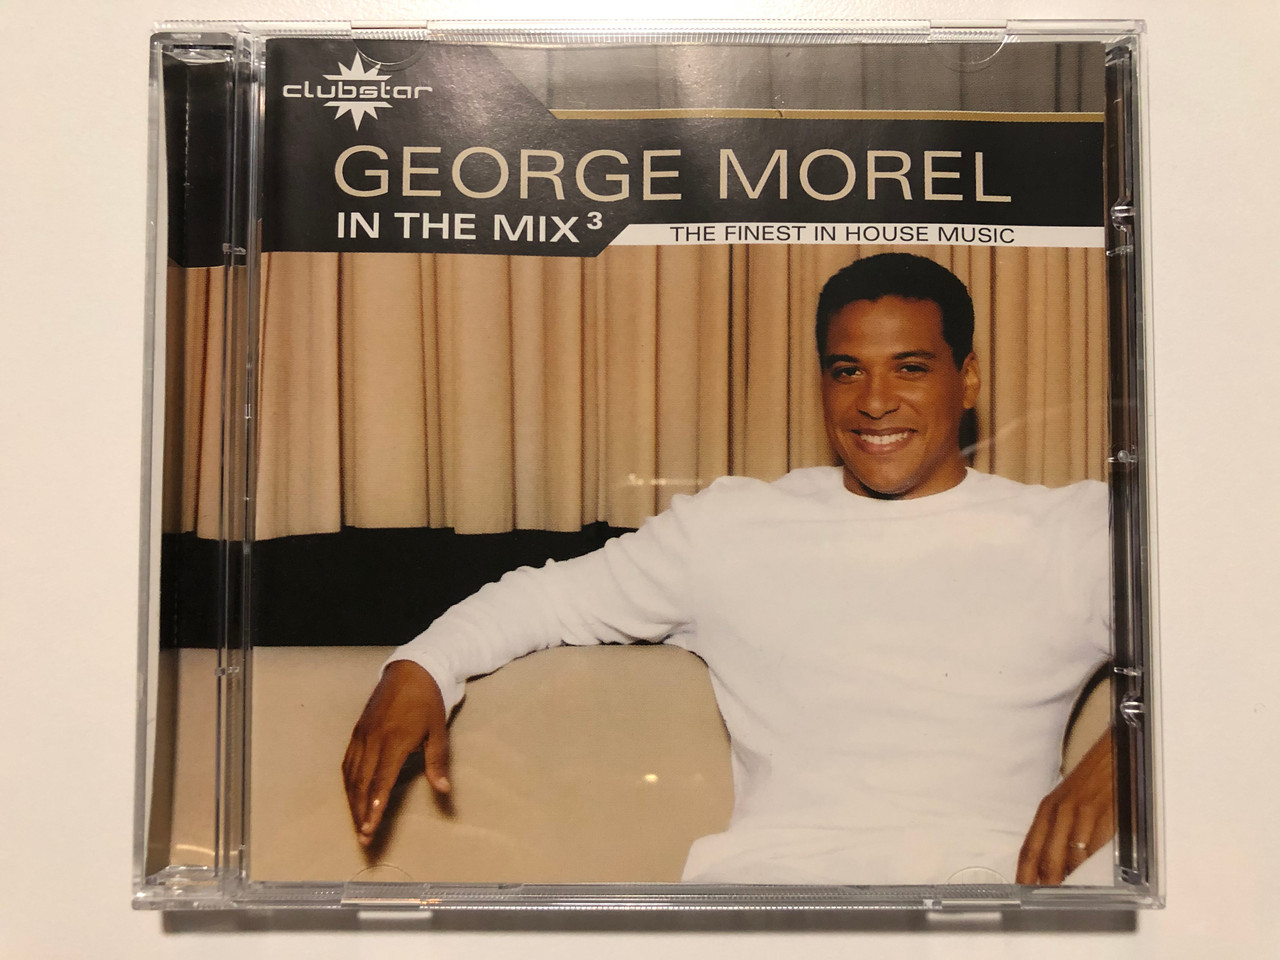 https://cdn10.bigcommerce.com/s-62bdpkt7pb/products/29847/images/177526/George_Morel_In_The_Mix_The_Finest_In_House_Music_Clubstar_Audio_CD_CLU_10017-2_1__48854.1620283833.1280.1280.JPG?c=2&_ga=2.117550153.1561355153.1620311476-427177752.1620311476